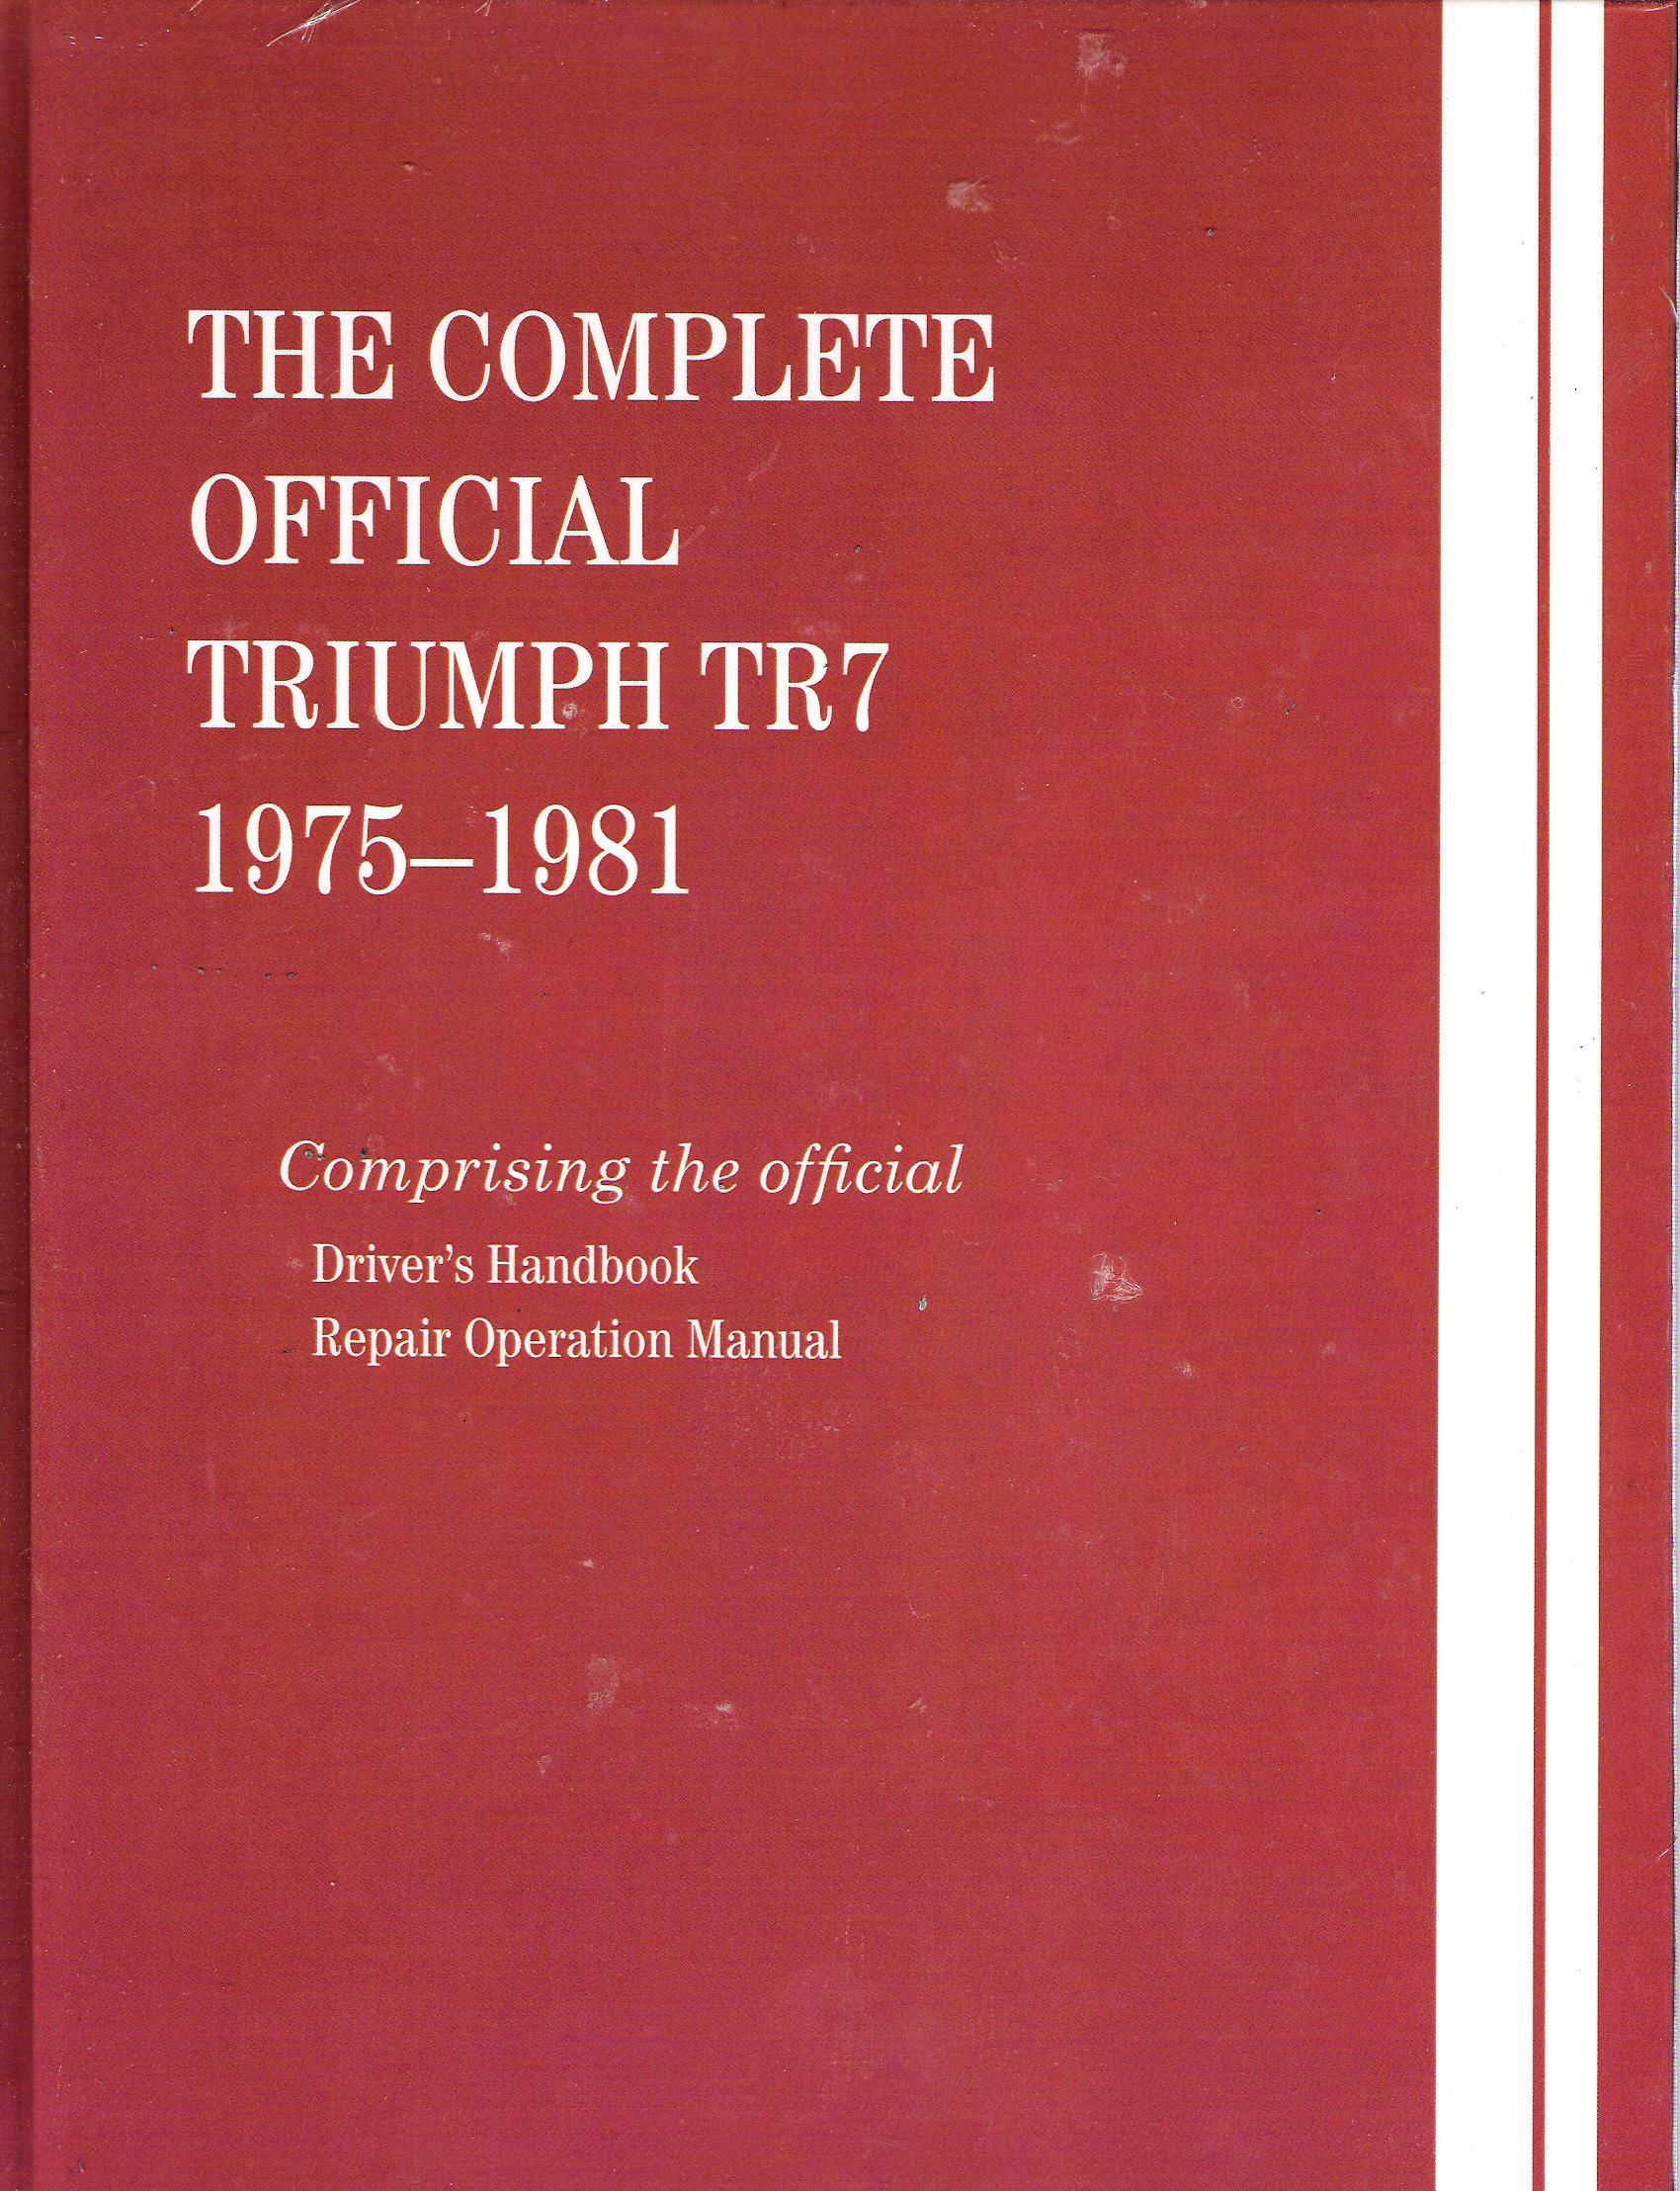 1975-1981 The Complete Official Triumph TR7 Bentley Publishers Factory Service Manual